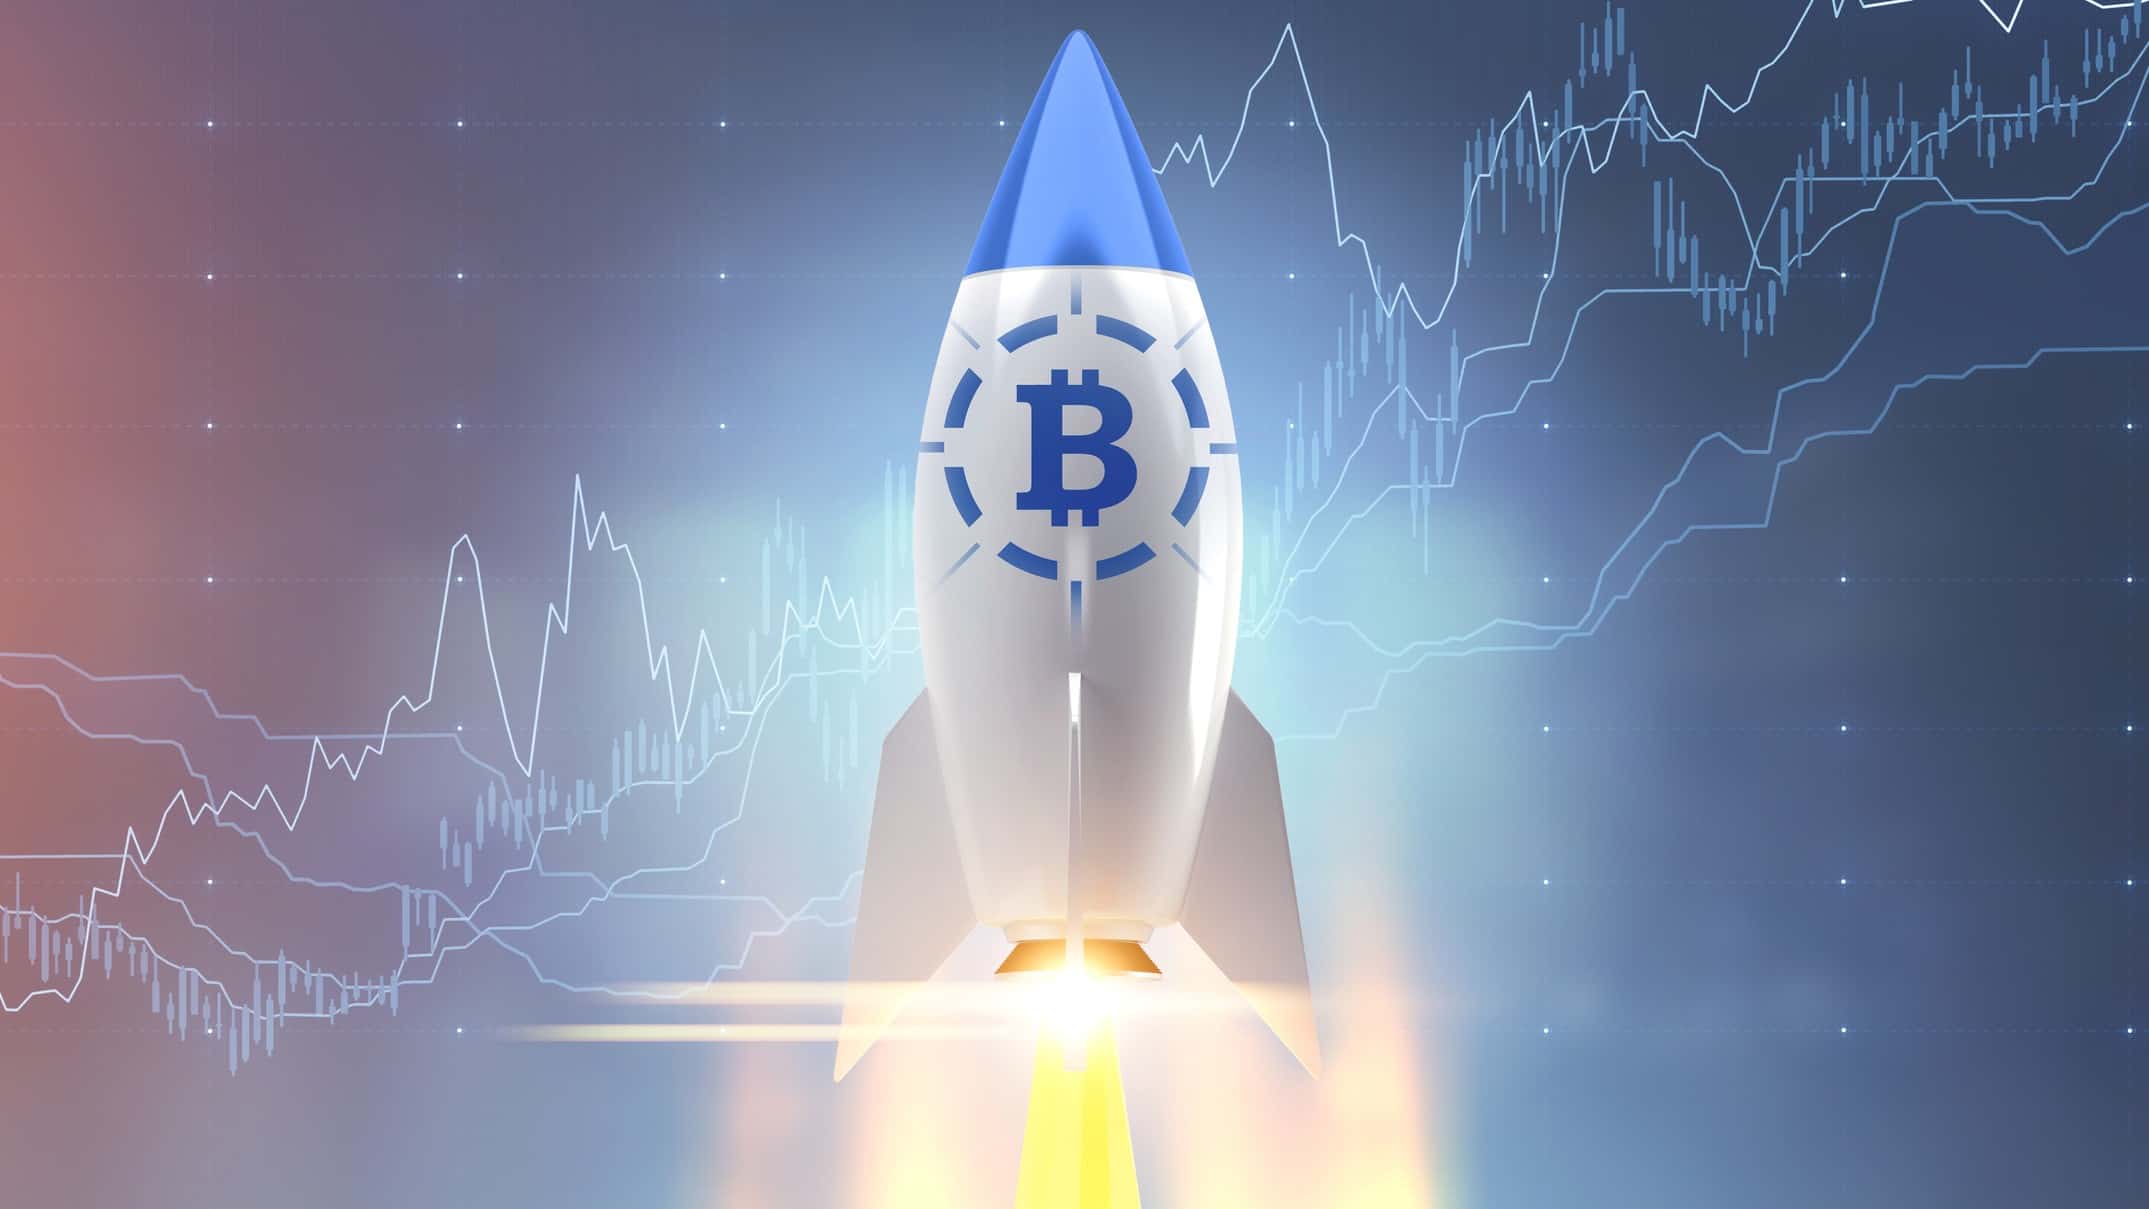 A rocket with a bitcoin symbol take off, indicating a surging or record high price in the cryptocurrency